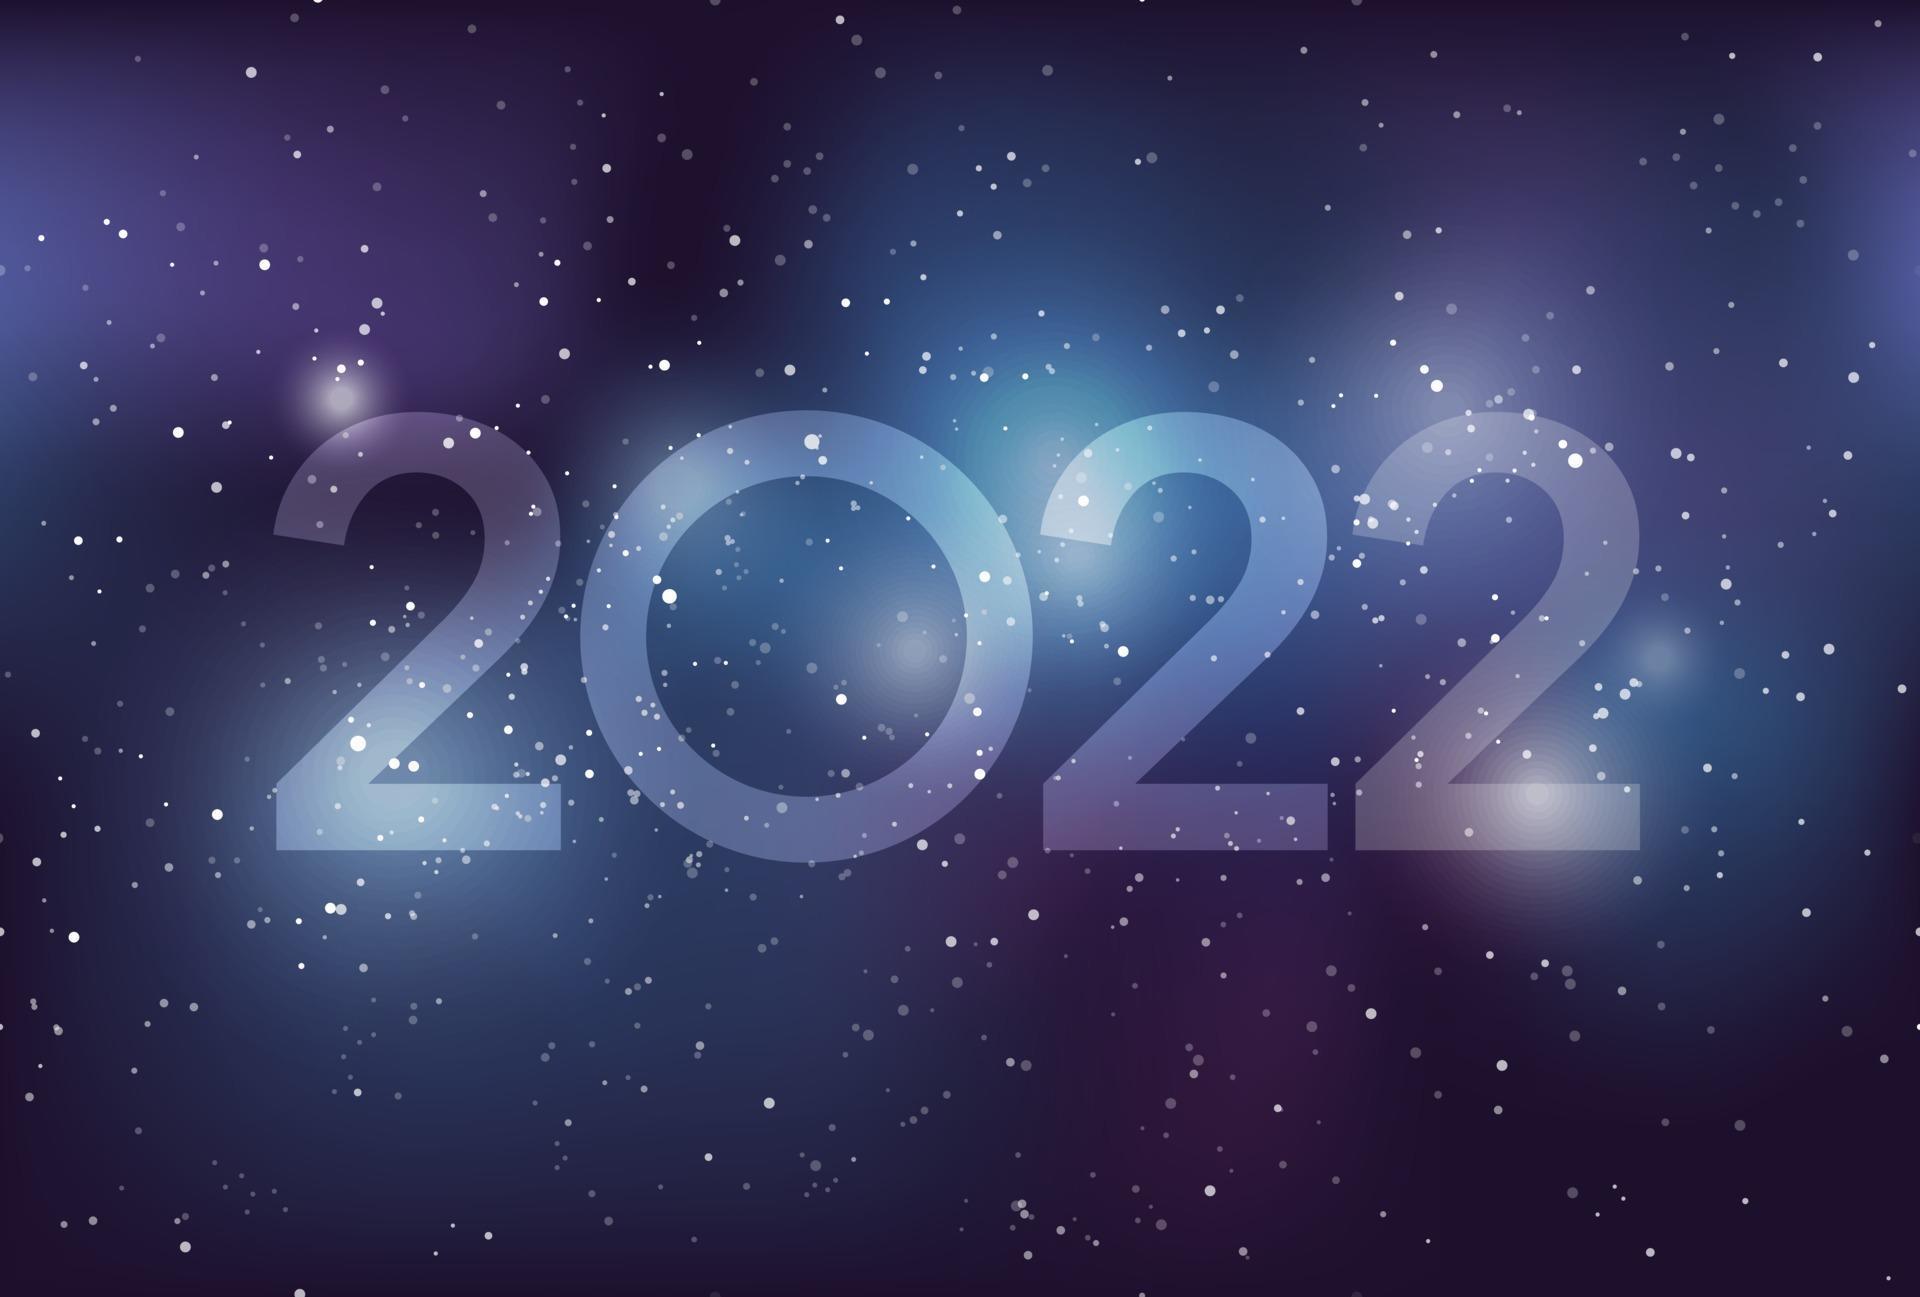 The Year 2022 Greeting Card Template With Milky Way Galaxy 2947321 